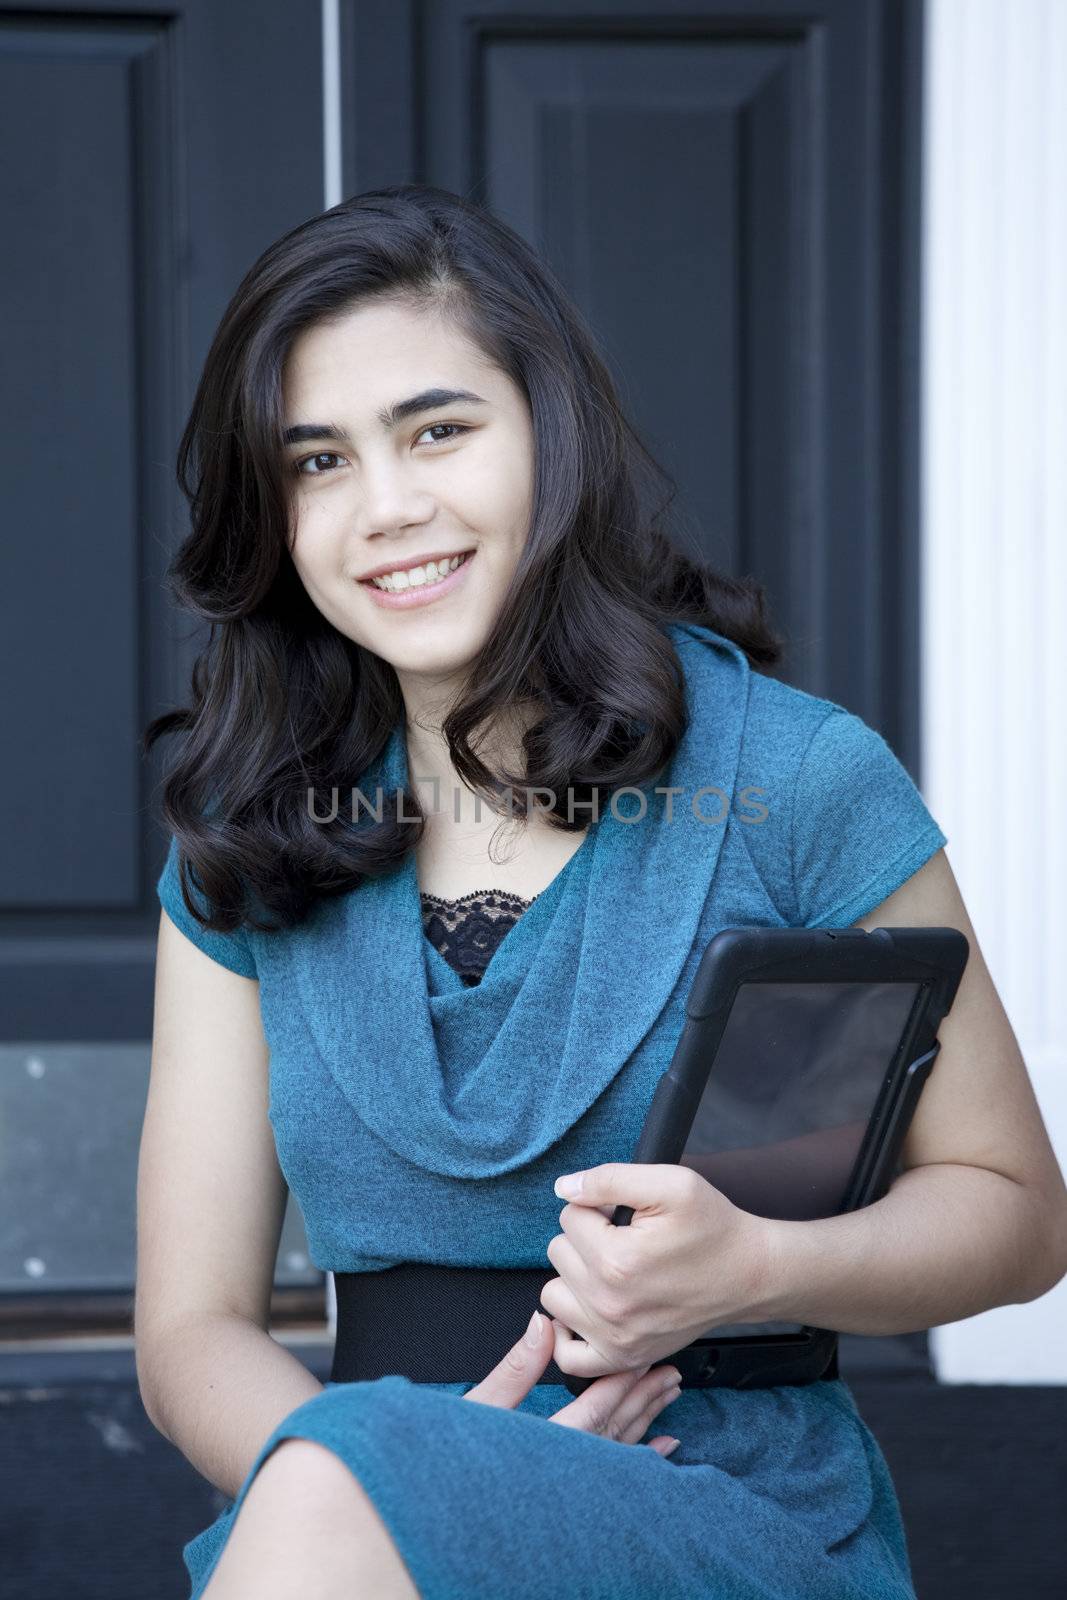 Beautiful, well dressed, biracial teen or young woman holding computer tablet